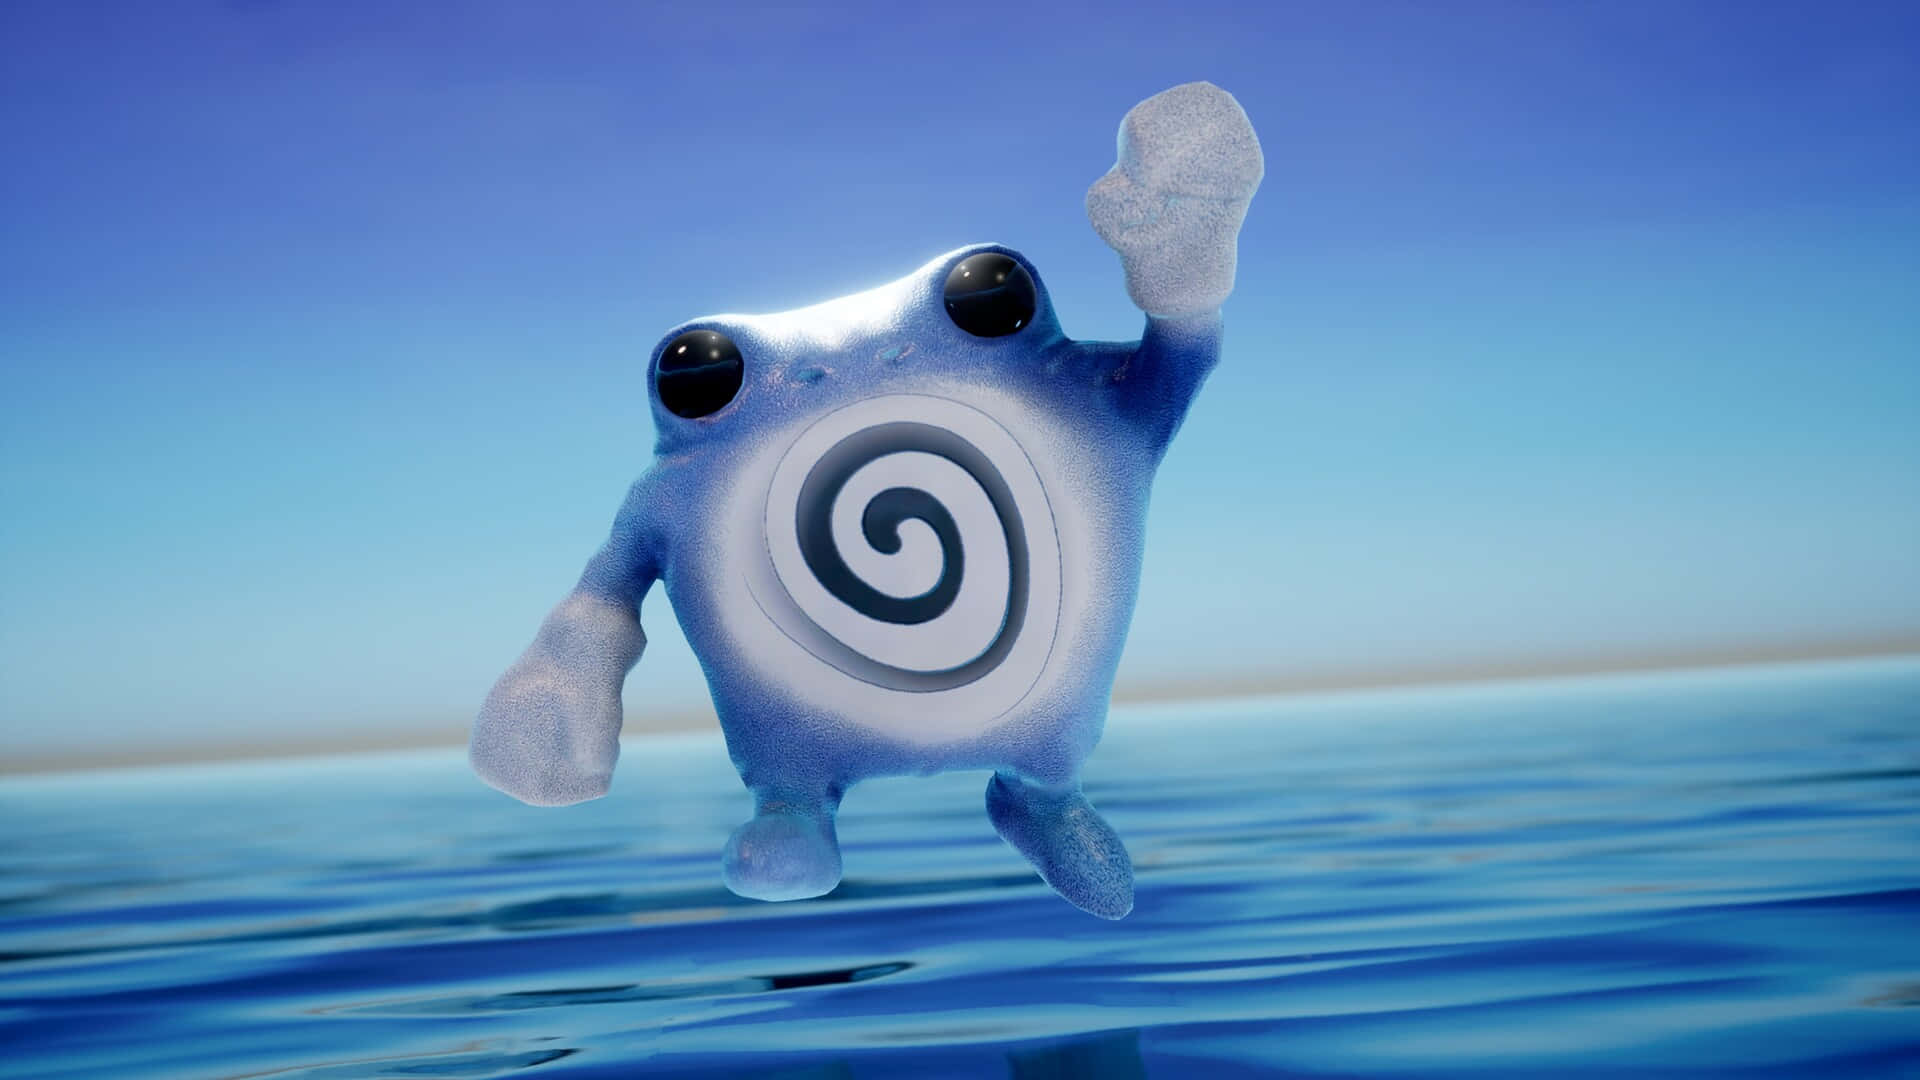 Stunning Realistic Art of Poliwhirl Pokemon in Action Wallpaper